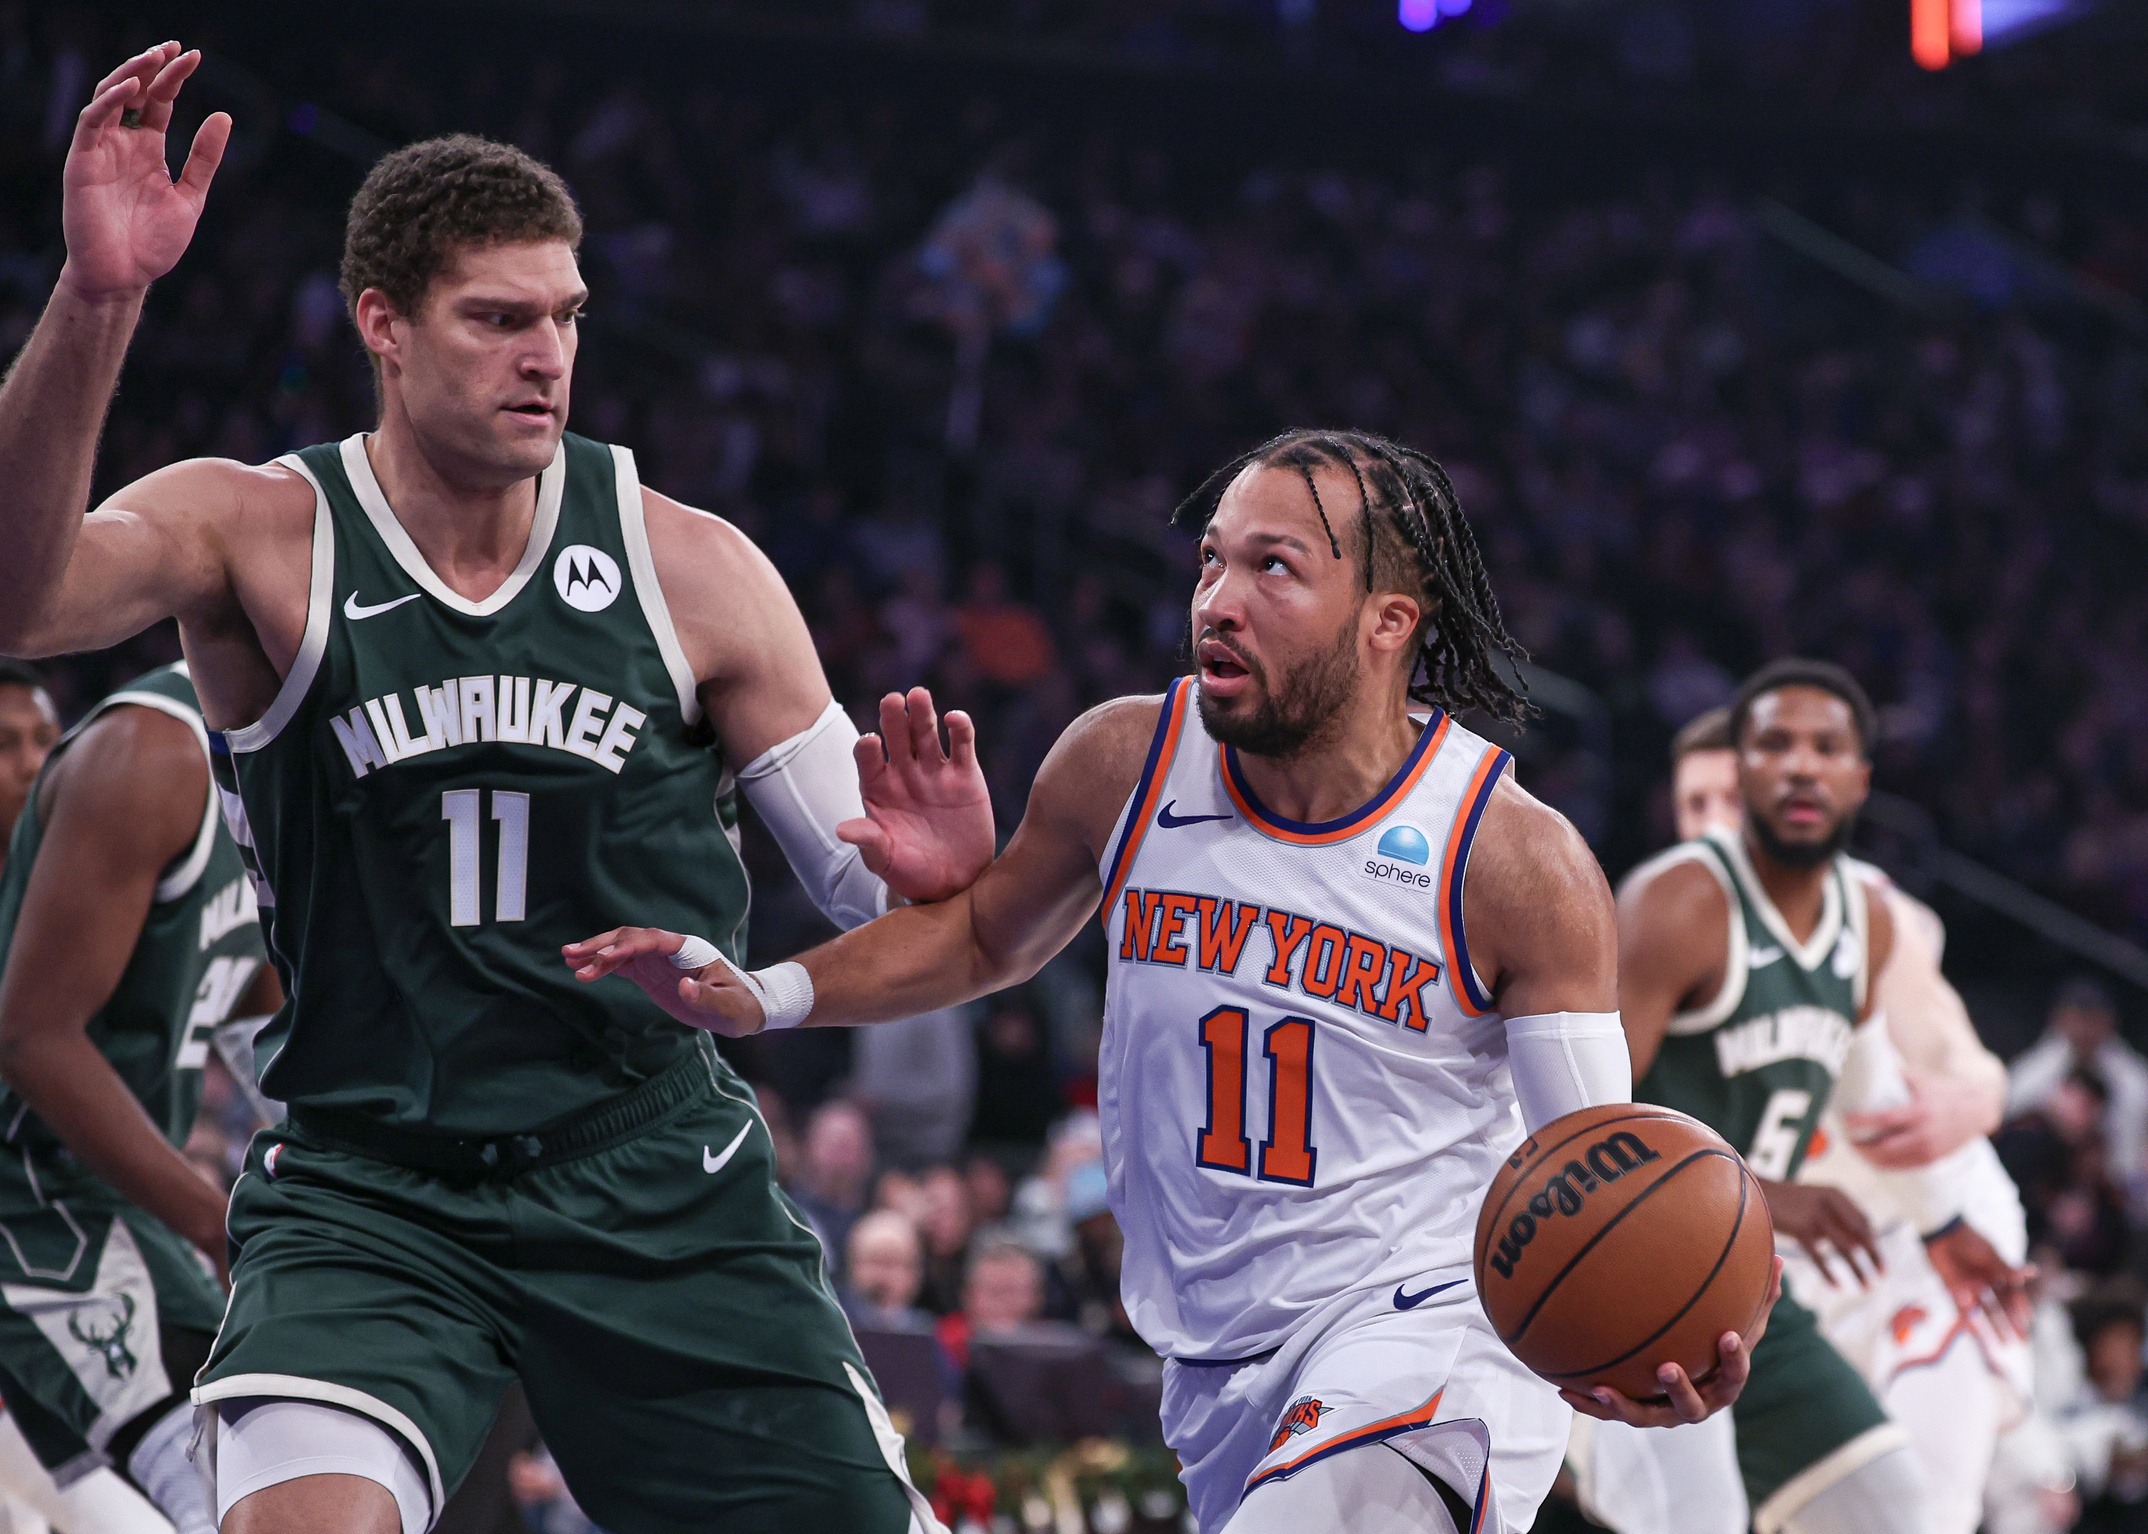 Dec 25, 2023; New York, New York, USA; New York Knicks guard Jalen Brunson (11) drives to the basket against Milwaukee Bucks center Brook Lopez (11) during the first quarter at Madison Square Garden. Mandatory Credit: Vincent Carchietta-USA TODAY Sports